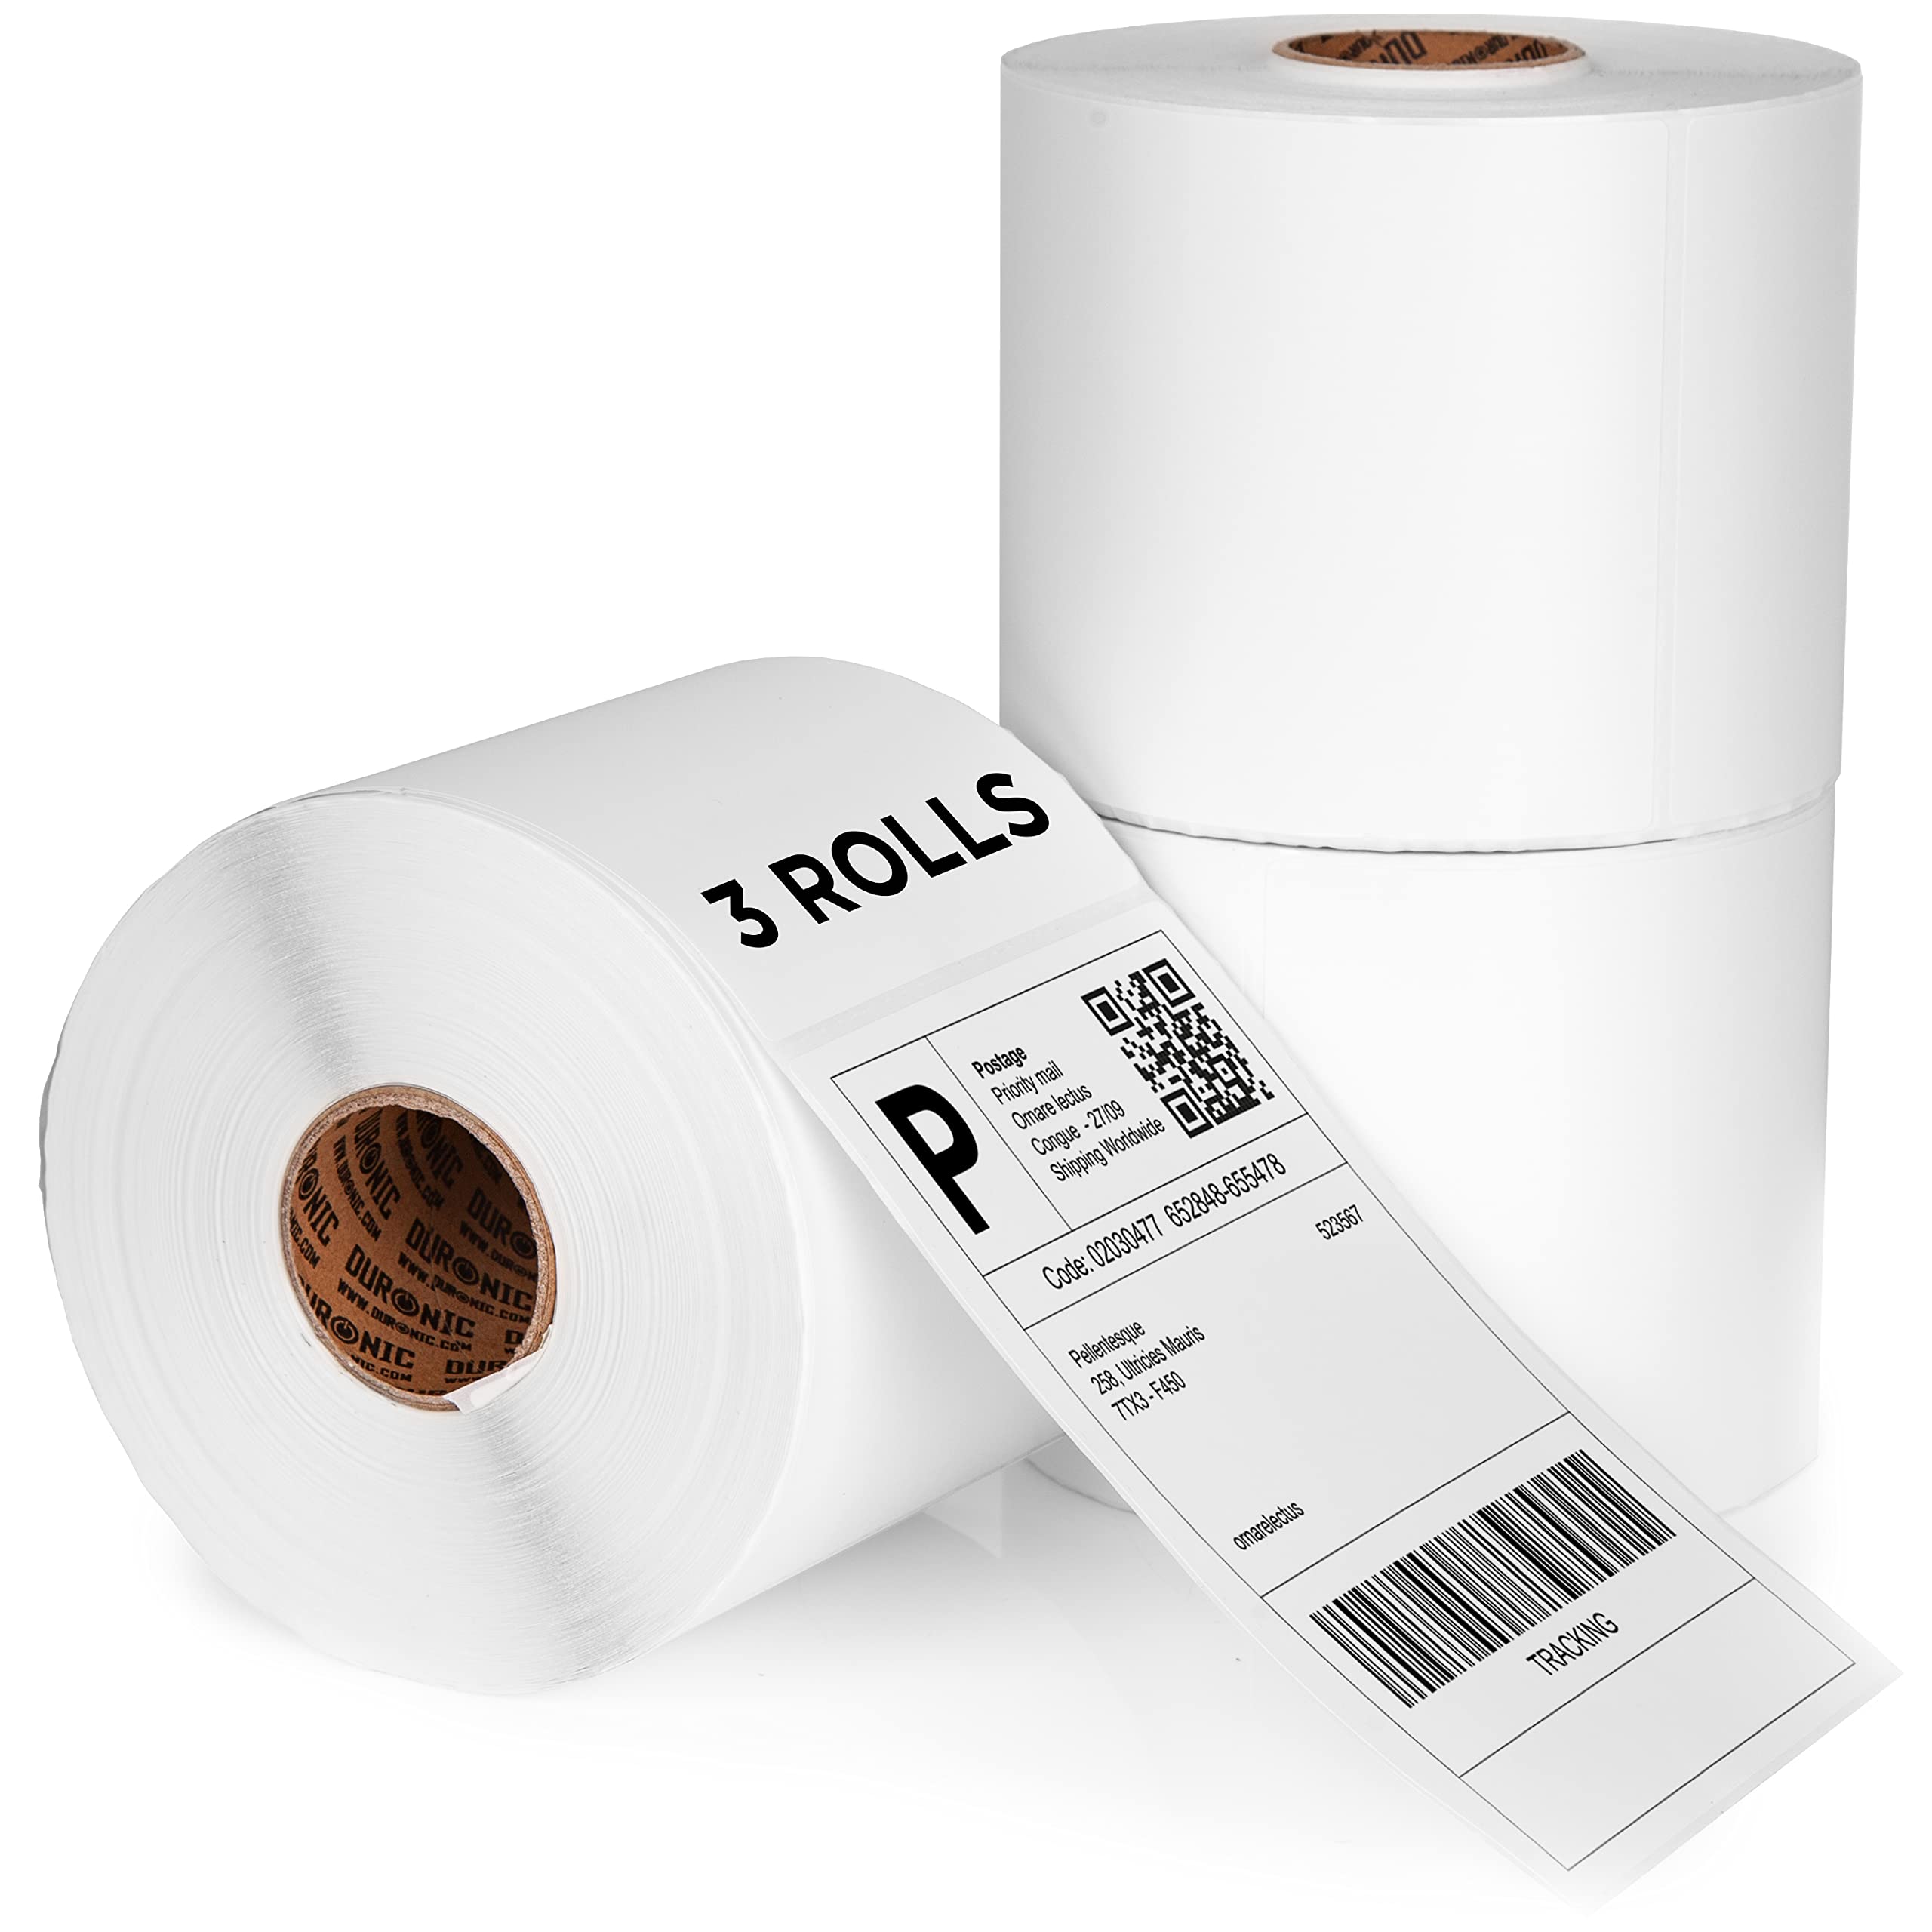 Duronic Thermal Labels LL4X6 [1500 Labels-3 Rolls] | 100x150mm (6x4”) Self-Adhesive Shipping Labels | Ideal Postage Labels for Etsy, Shopify, eBay, Amazon, Royal Mail, FedEx, UPS, Hermes | 3 ROLL PACK